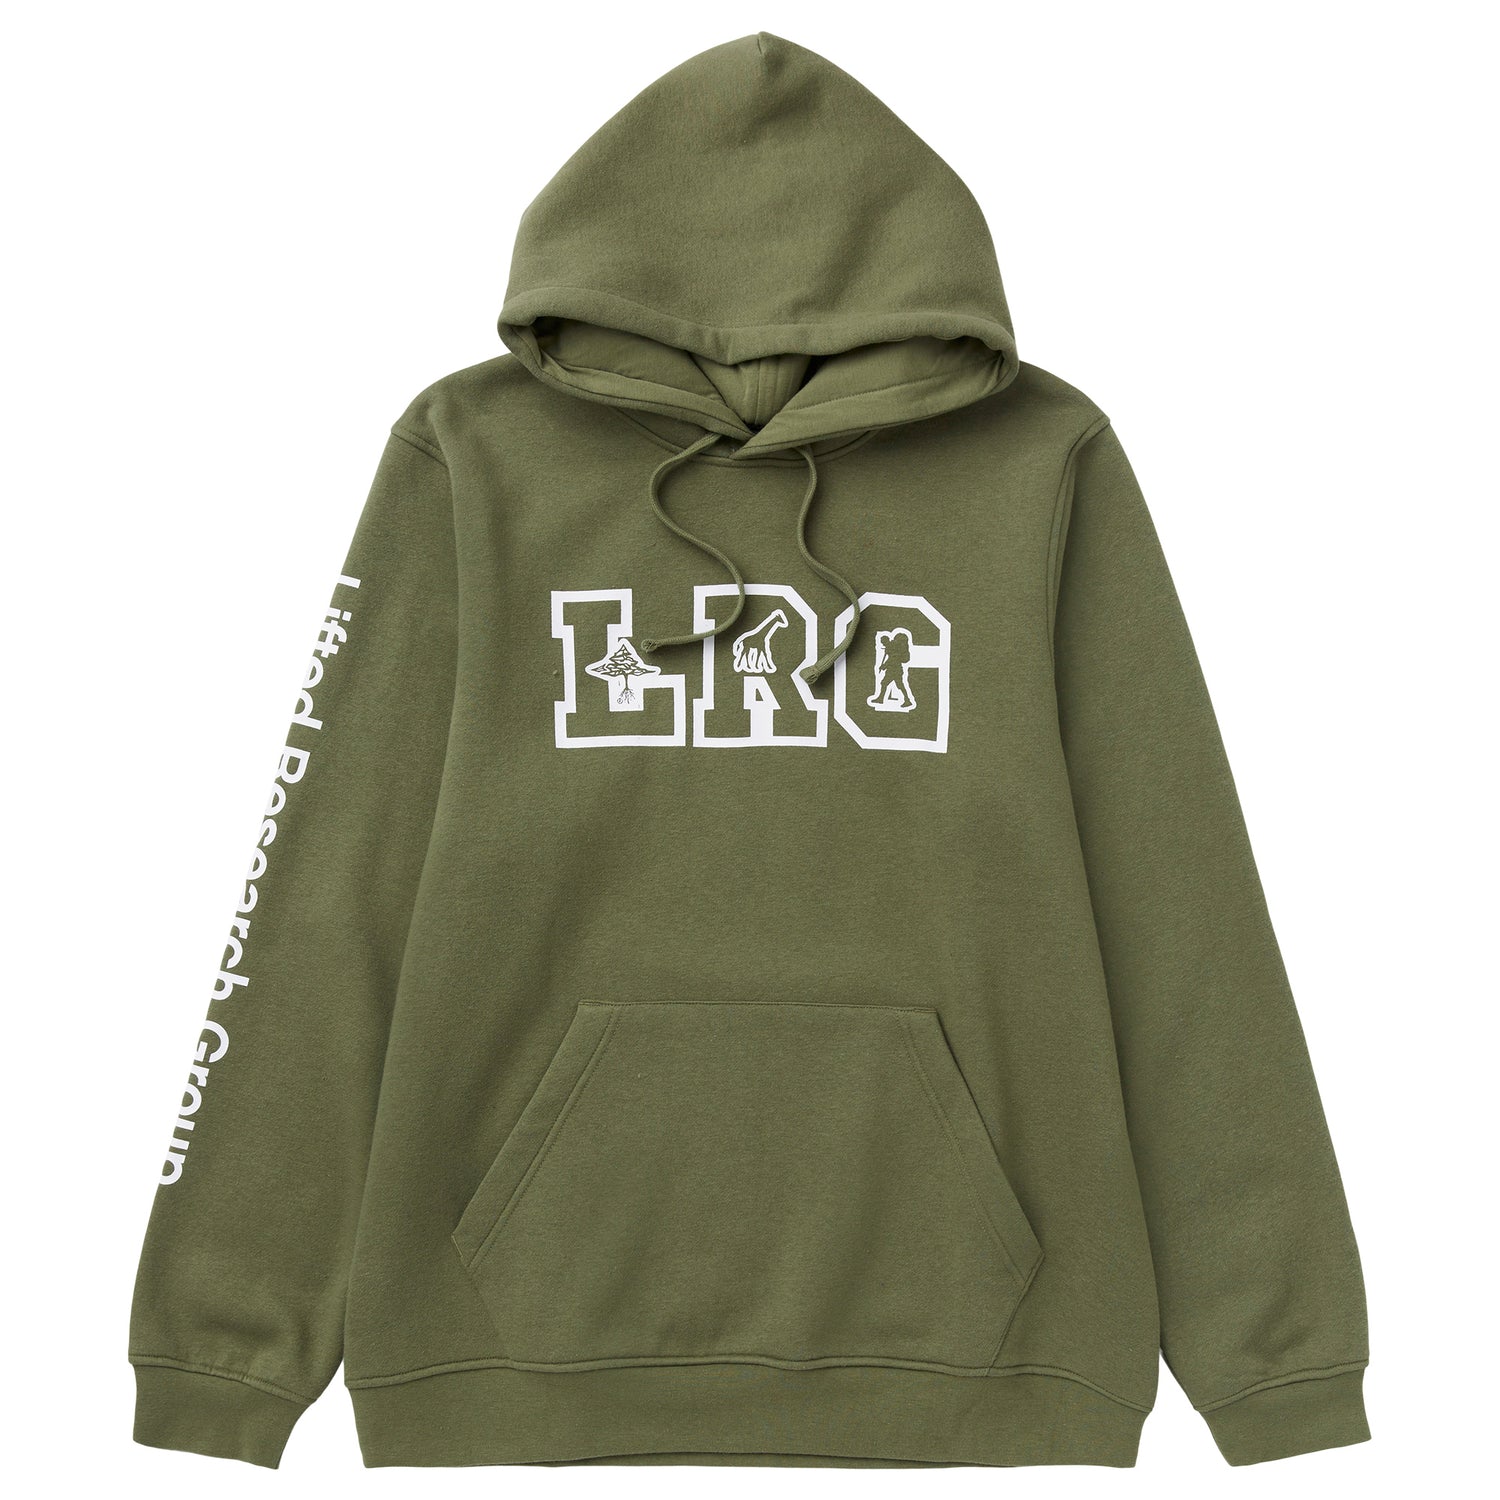 IVY LEAGUE PULLOVER HOODIE - OLIVE